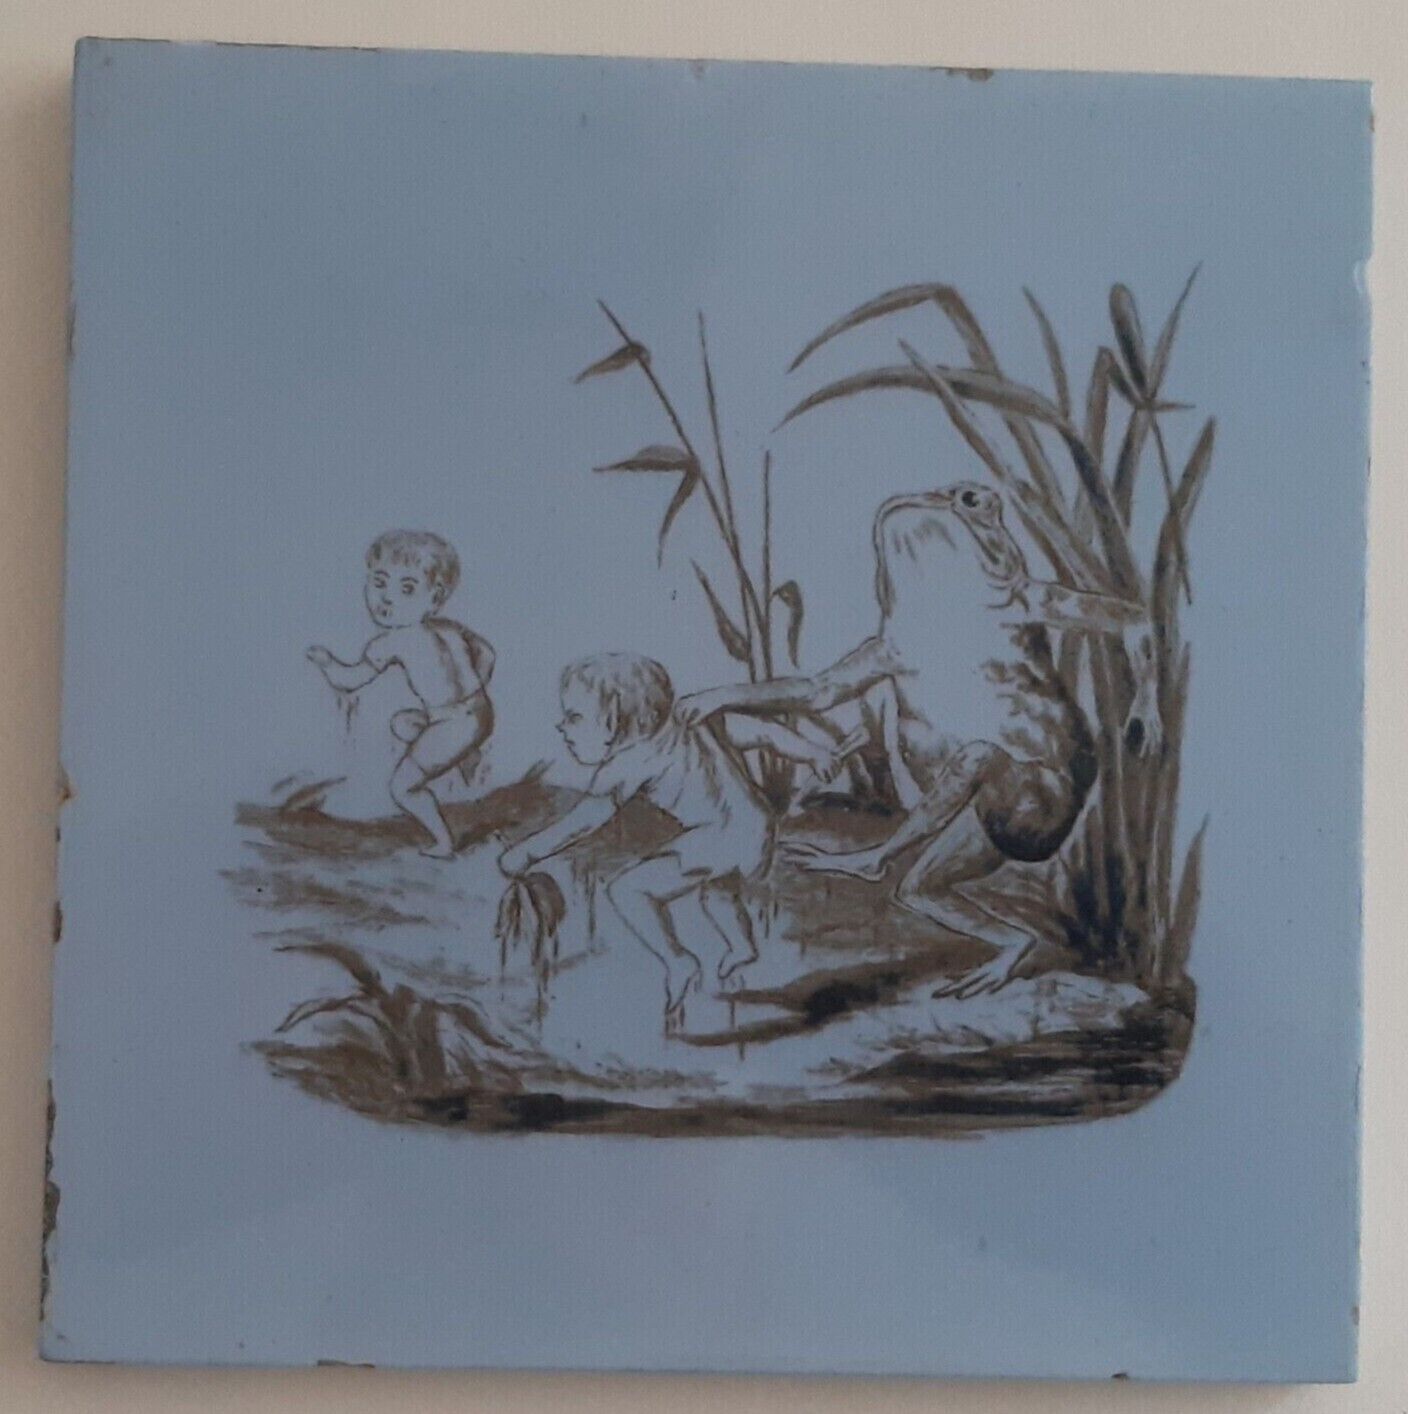 Antique Valuations: Antique tile of Imps or Elves with Frog by Minton Hollins about 1890